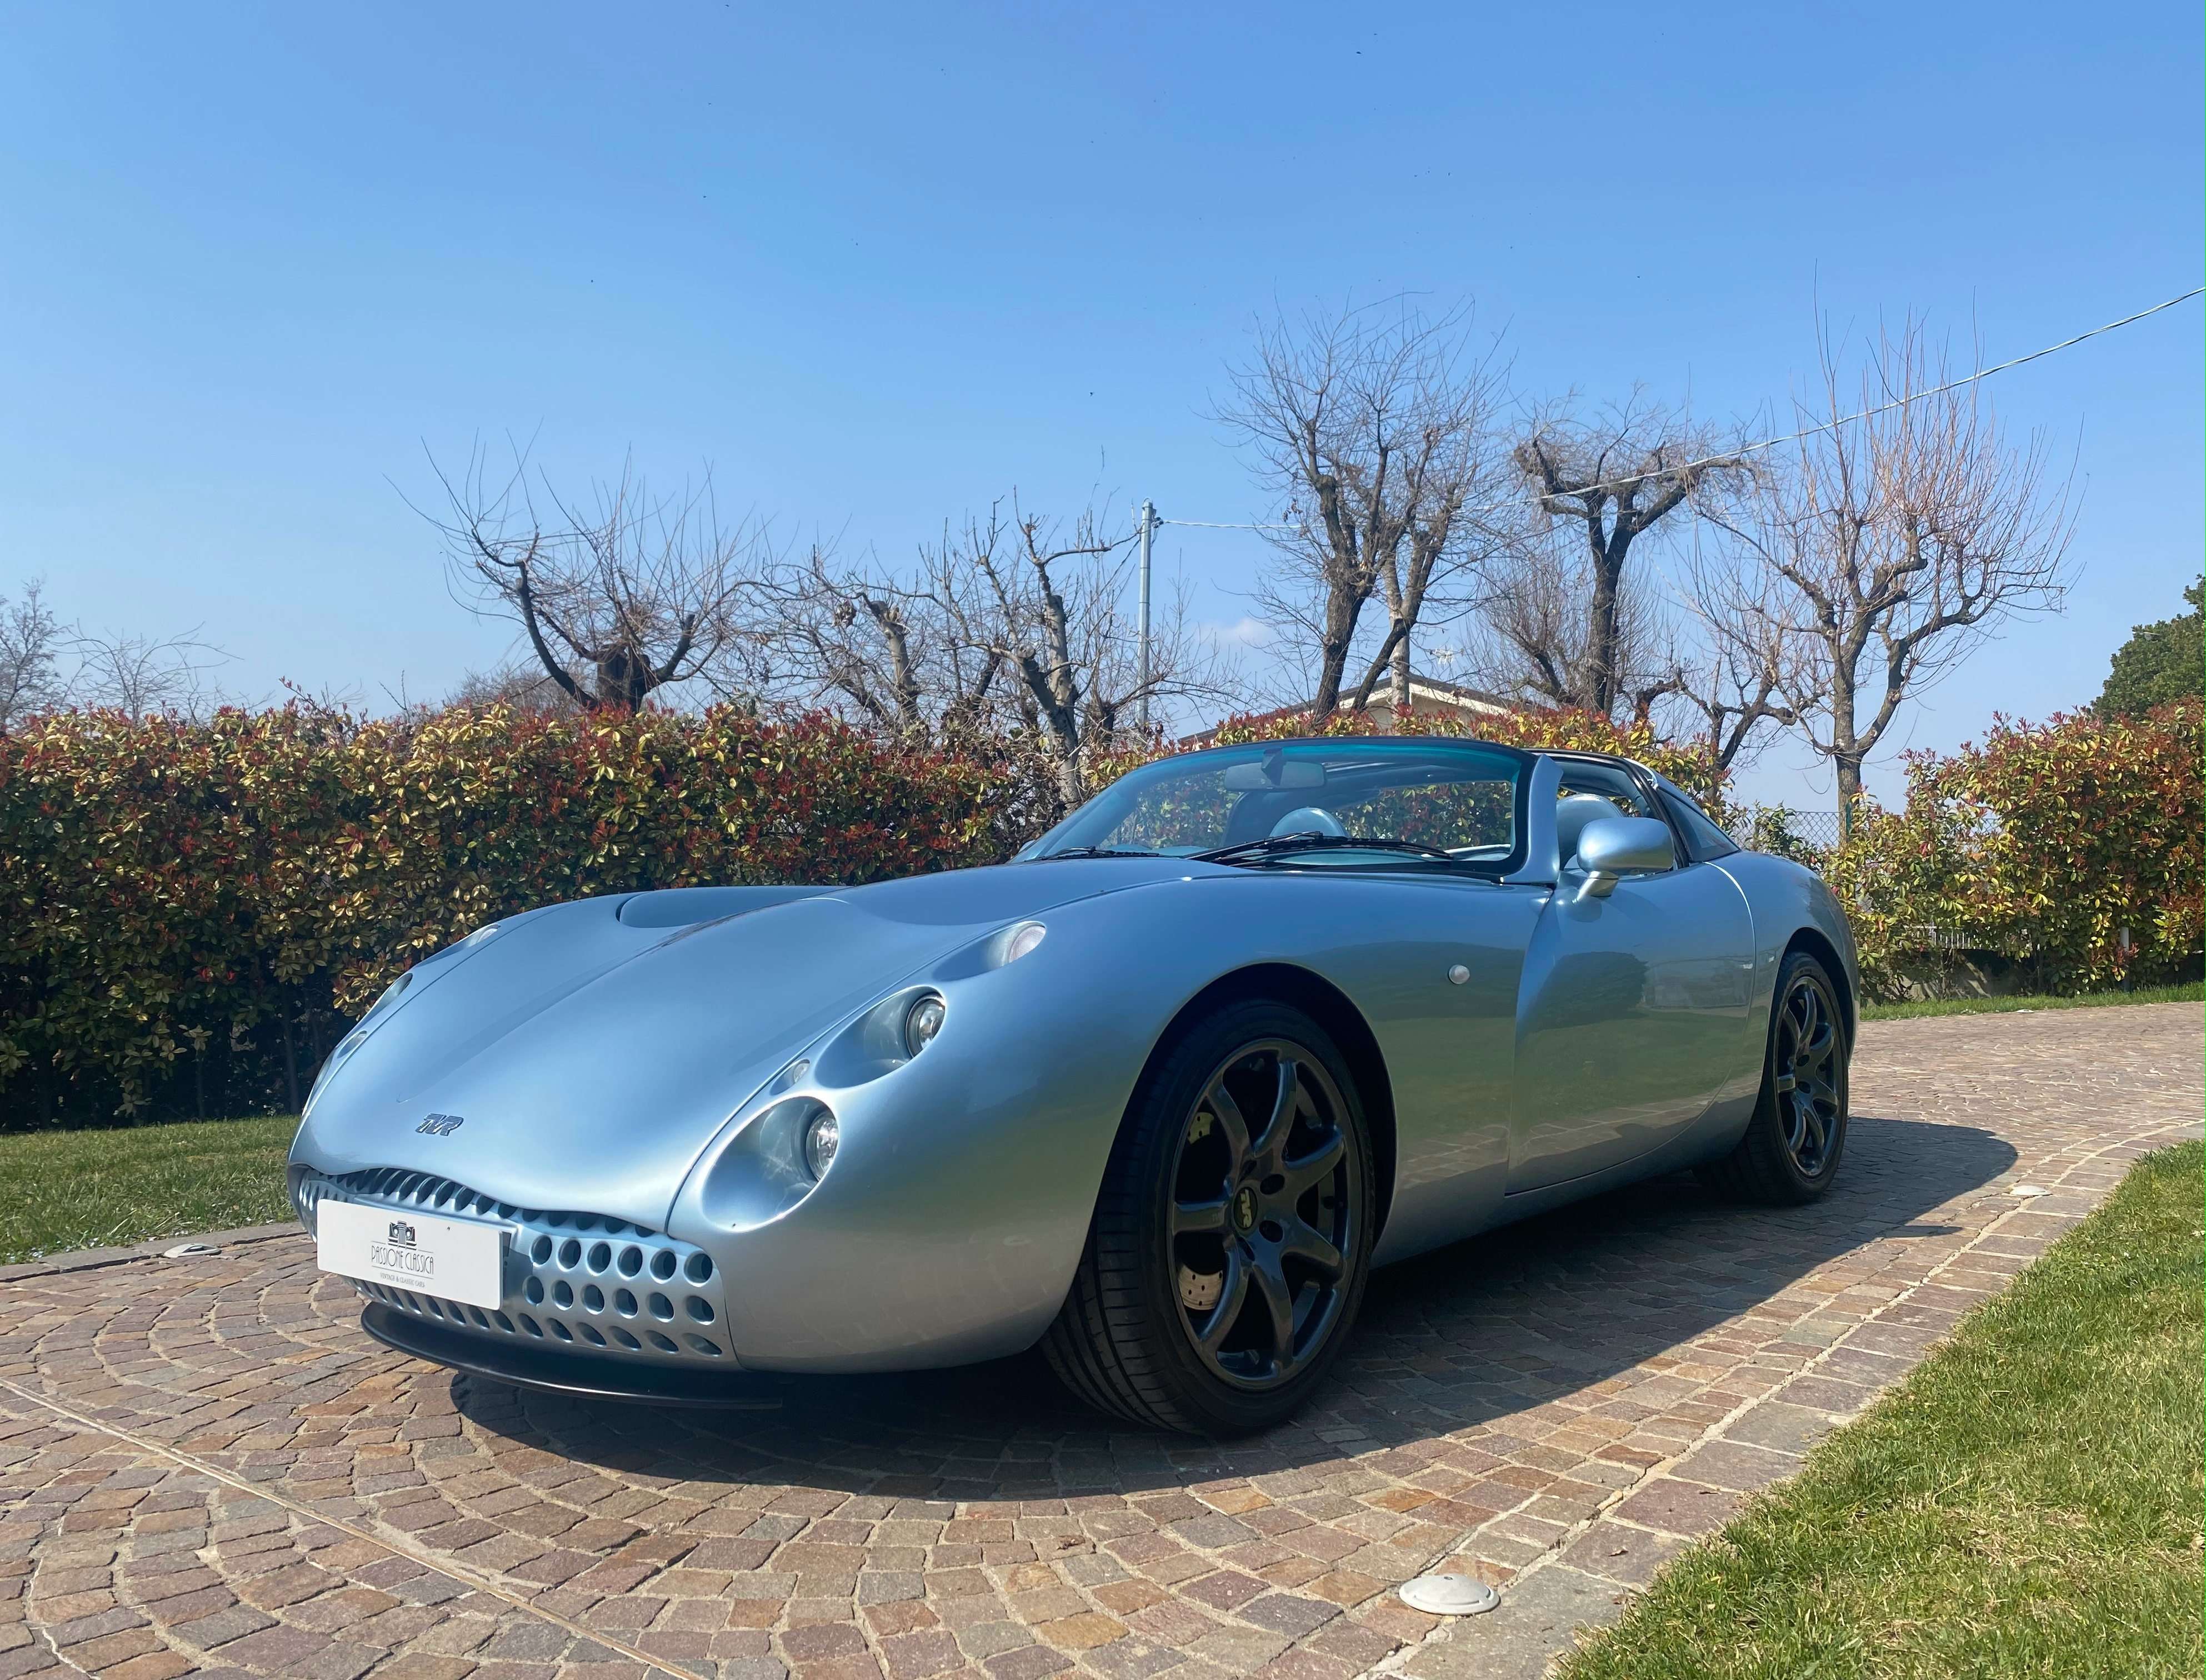 TVR Tuscan Other in Grey used in longare for € 45,000.-